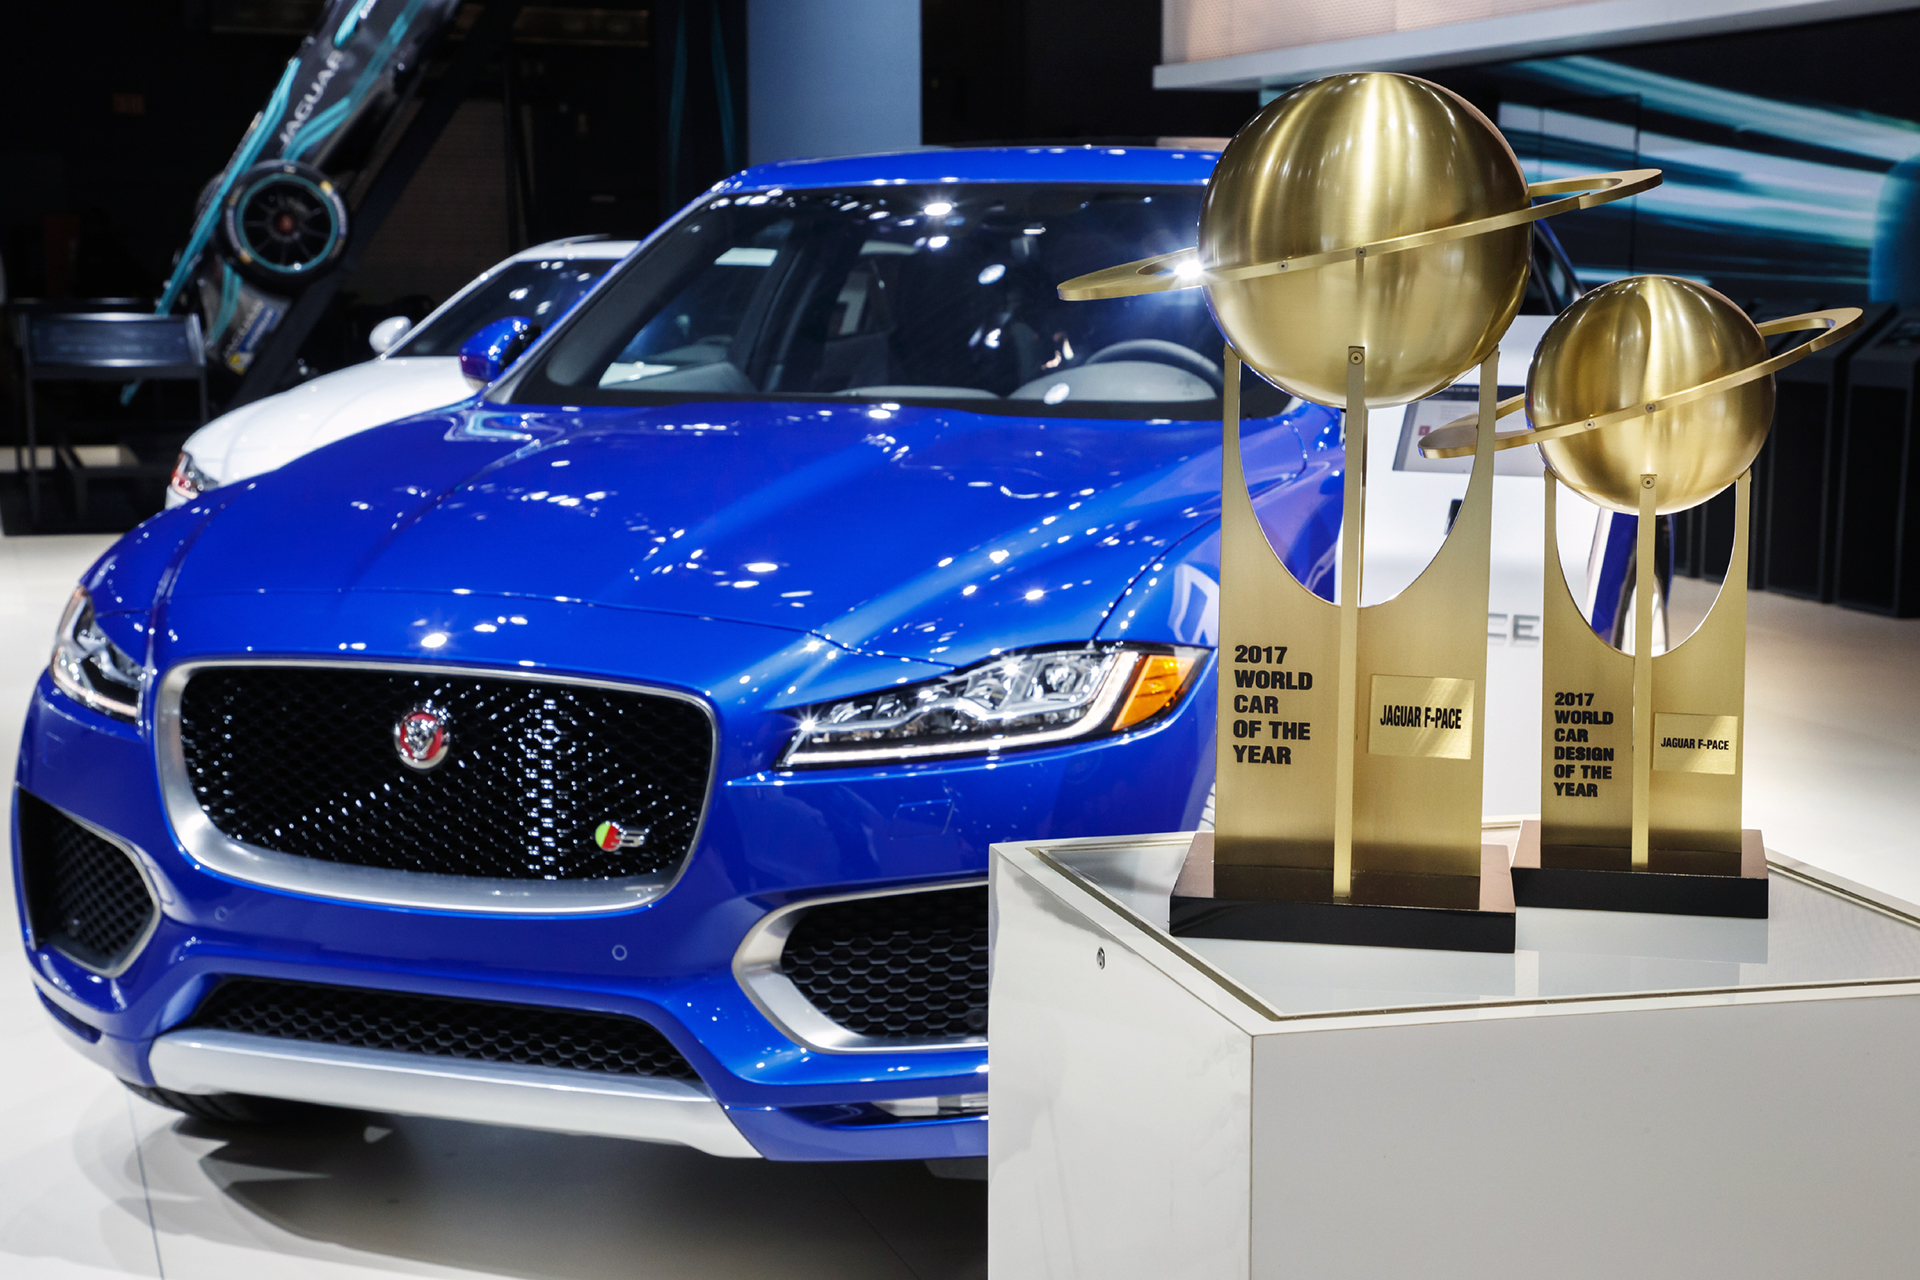 Jaguar F-Pace: World Car of the Year 2017 i World Car Design of the Year 2017